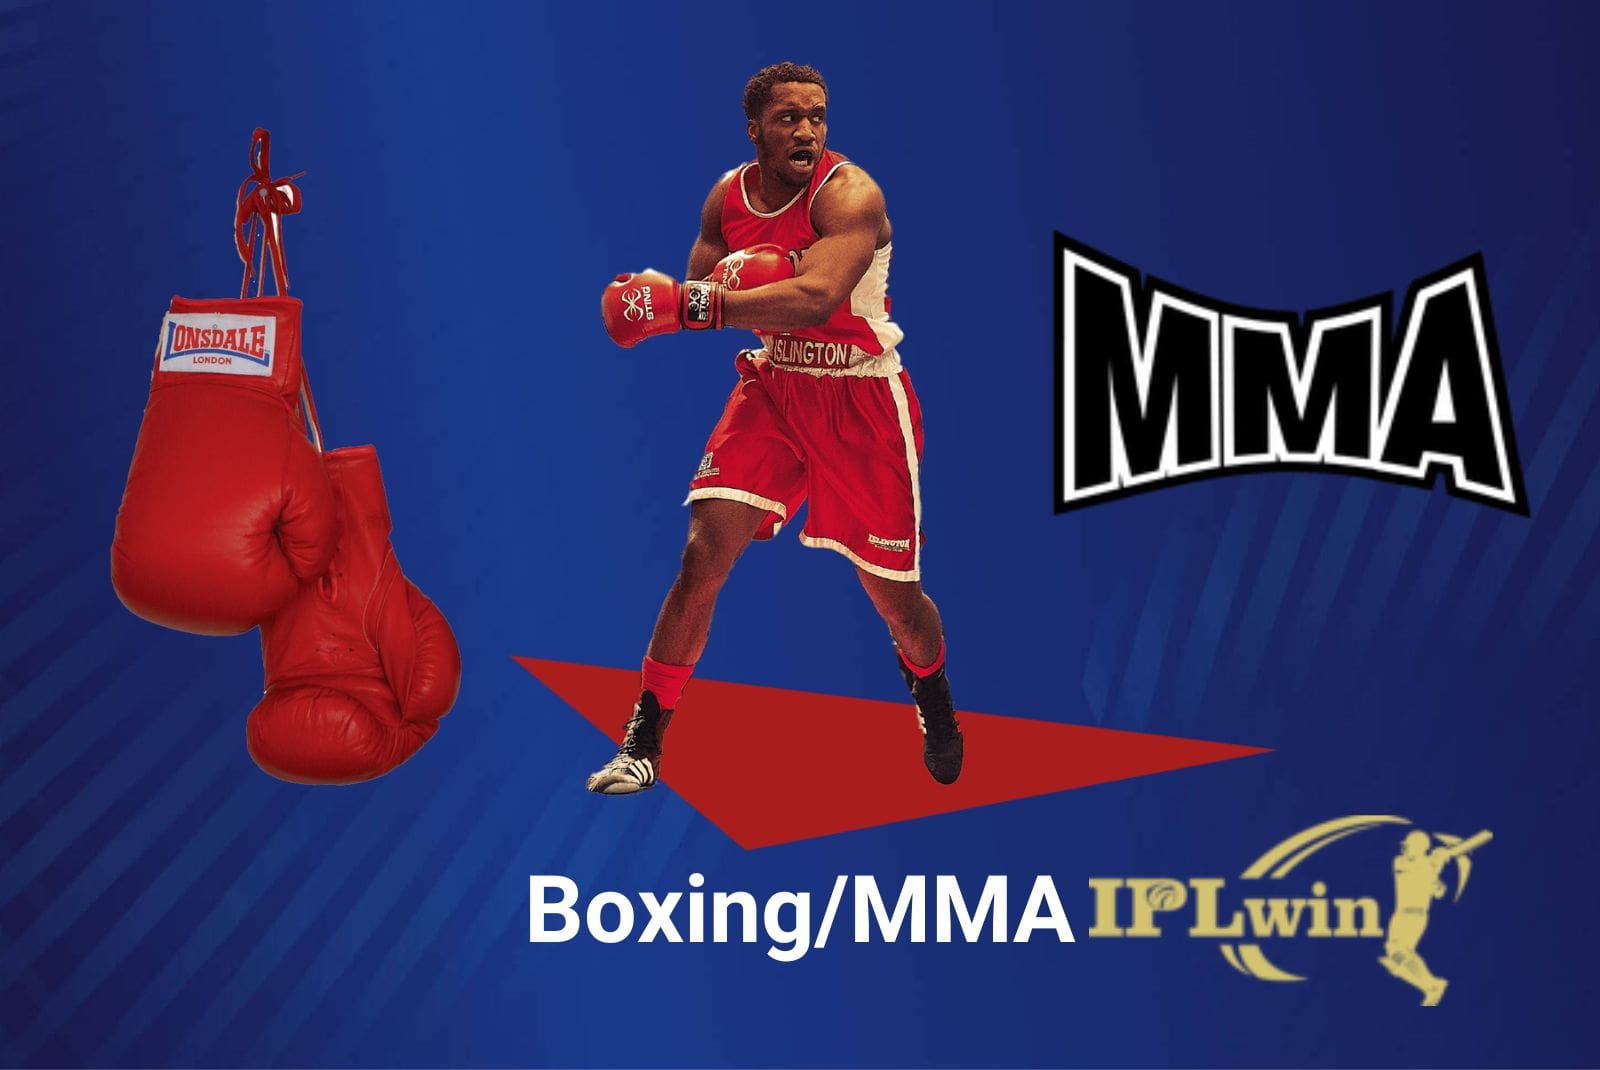 boxing and mma betting overview at IPLwin India online bookmaker